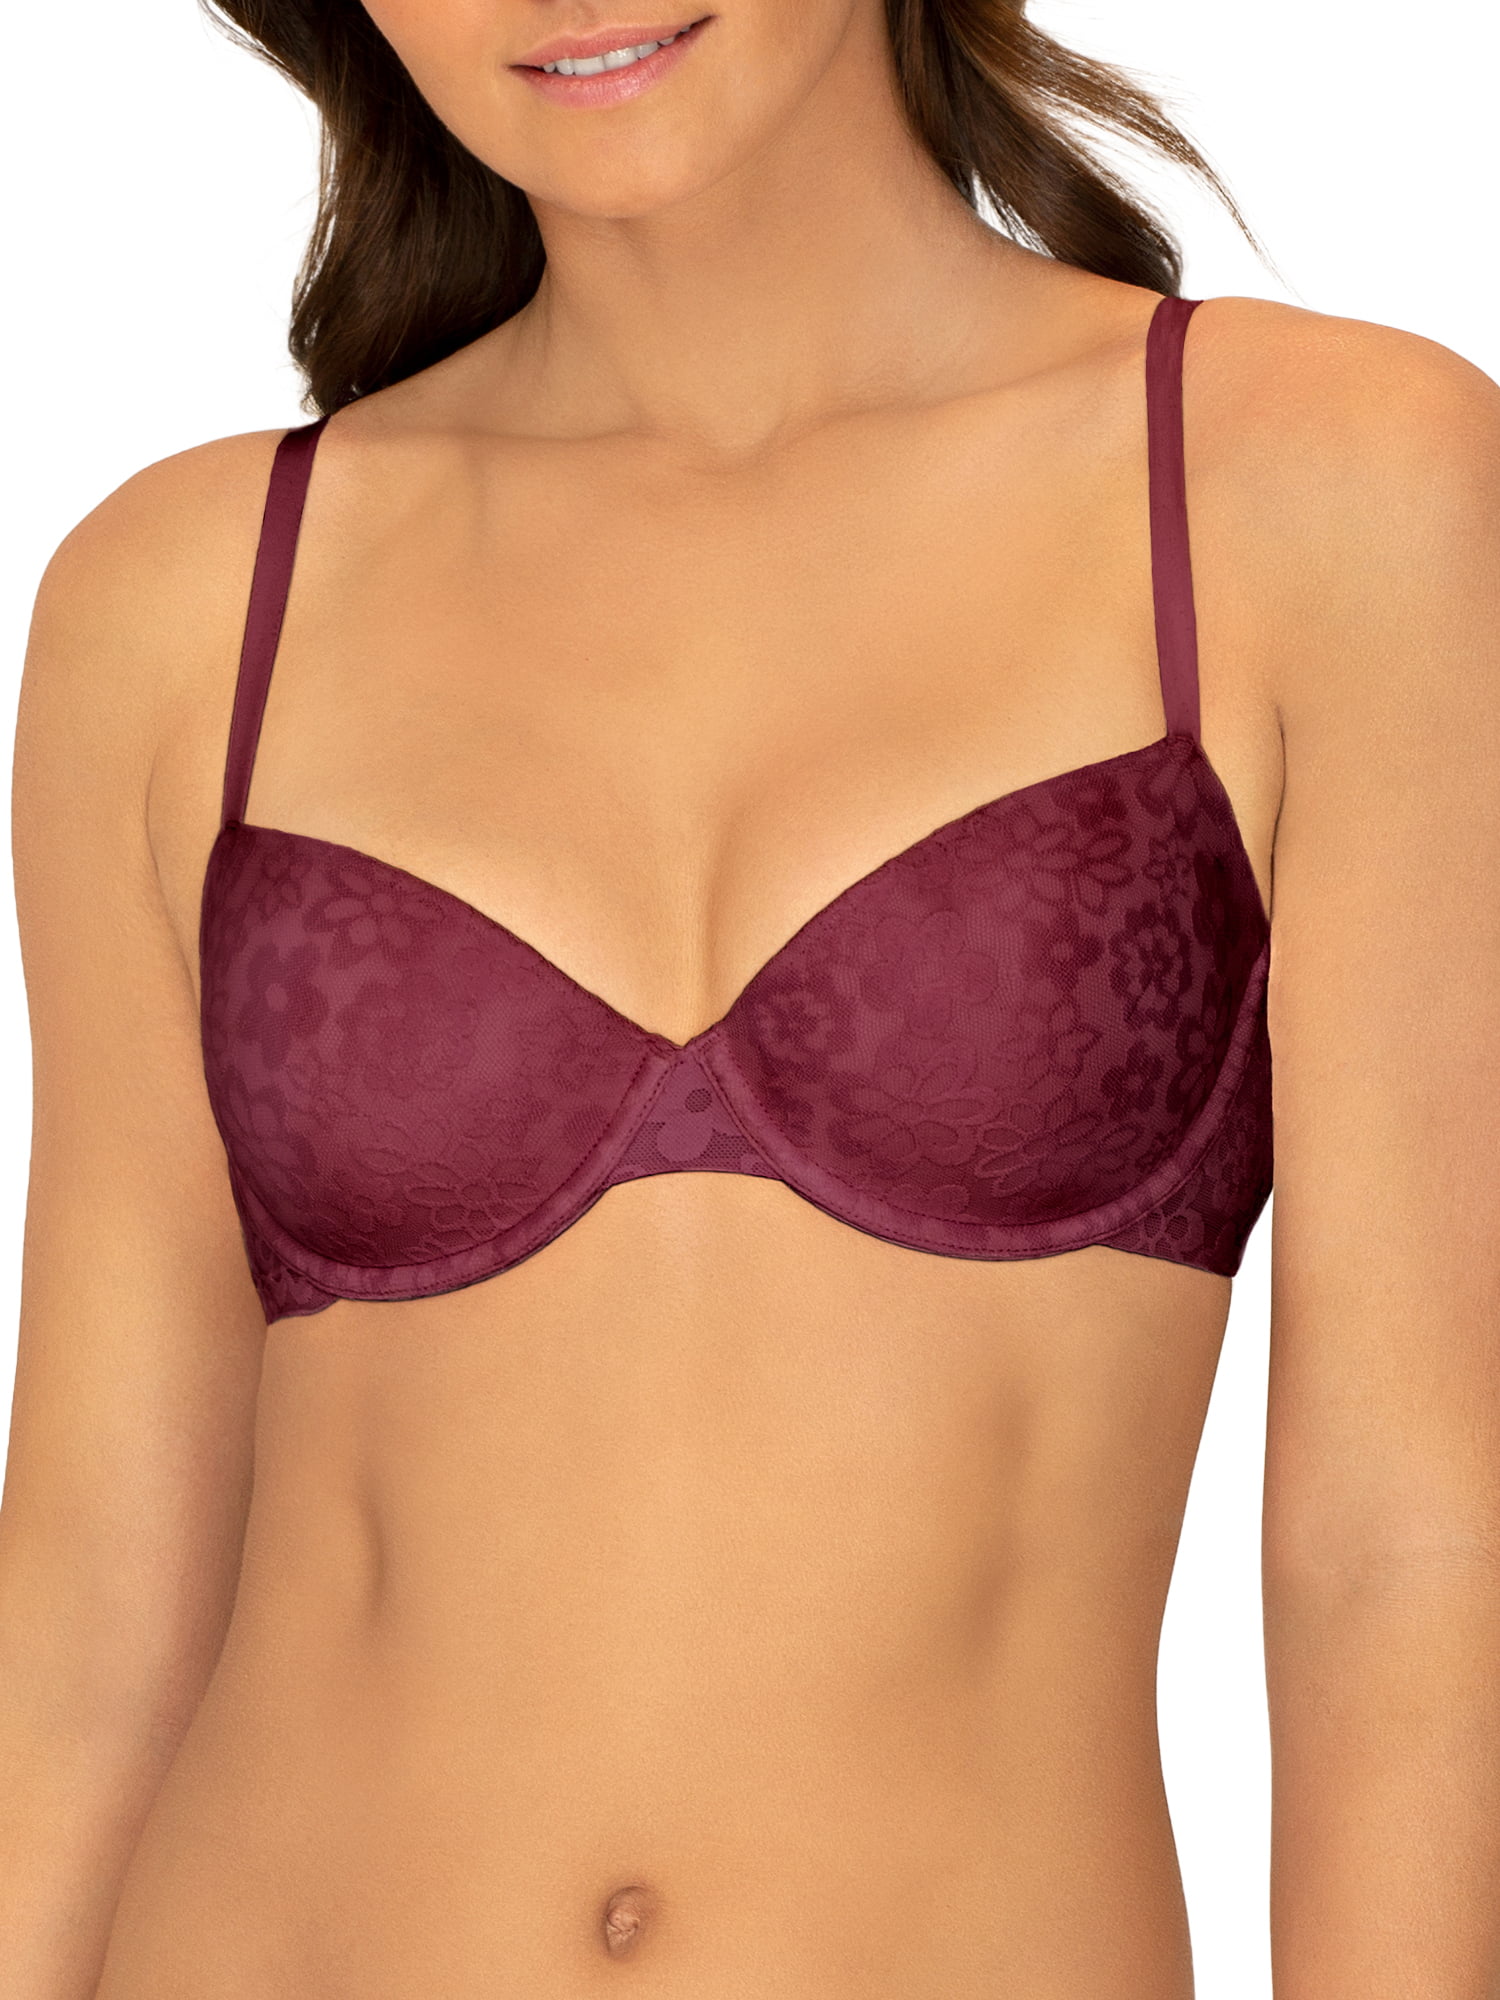 No Boundaries Women’s and Juniors’ Allover Lace Push Up Bra